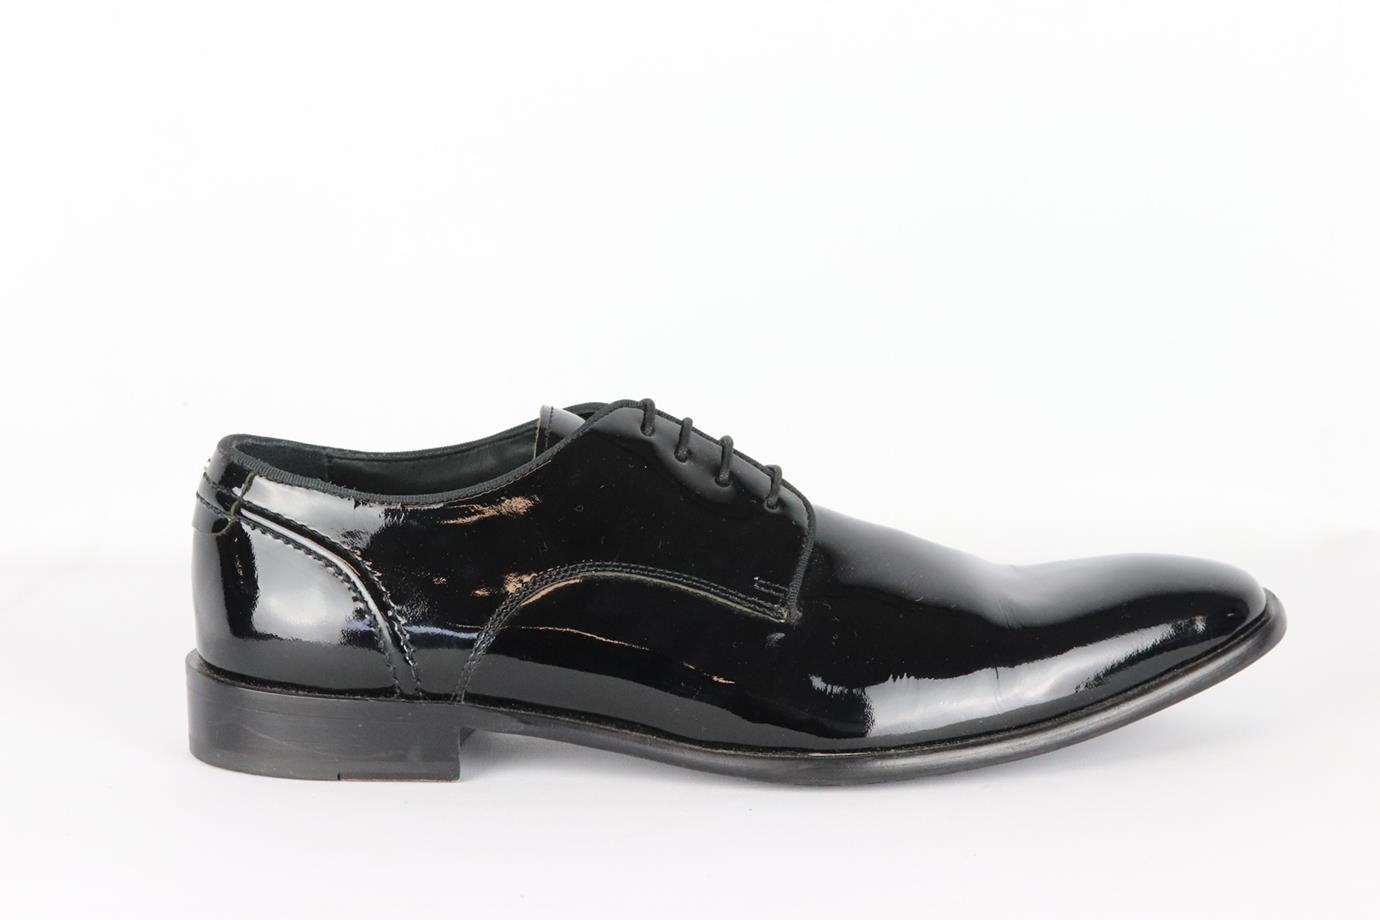 KENNETH COLE MEN'S PATENT LEATHER OXFORD SHOES EU 45.5 UK 11.5 US 12.5